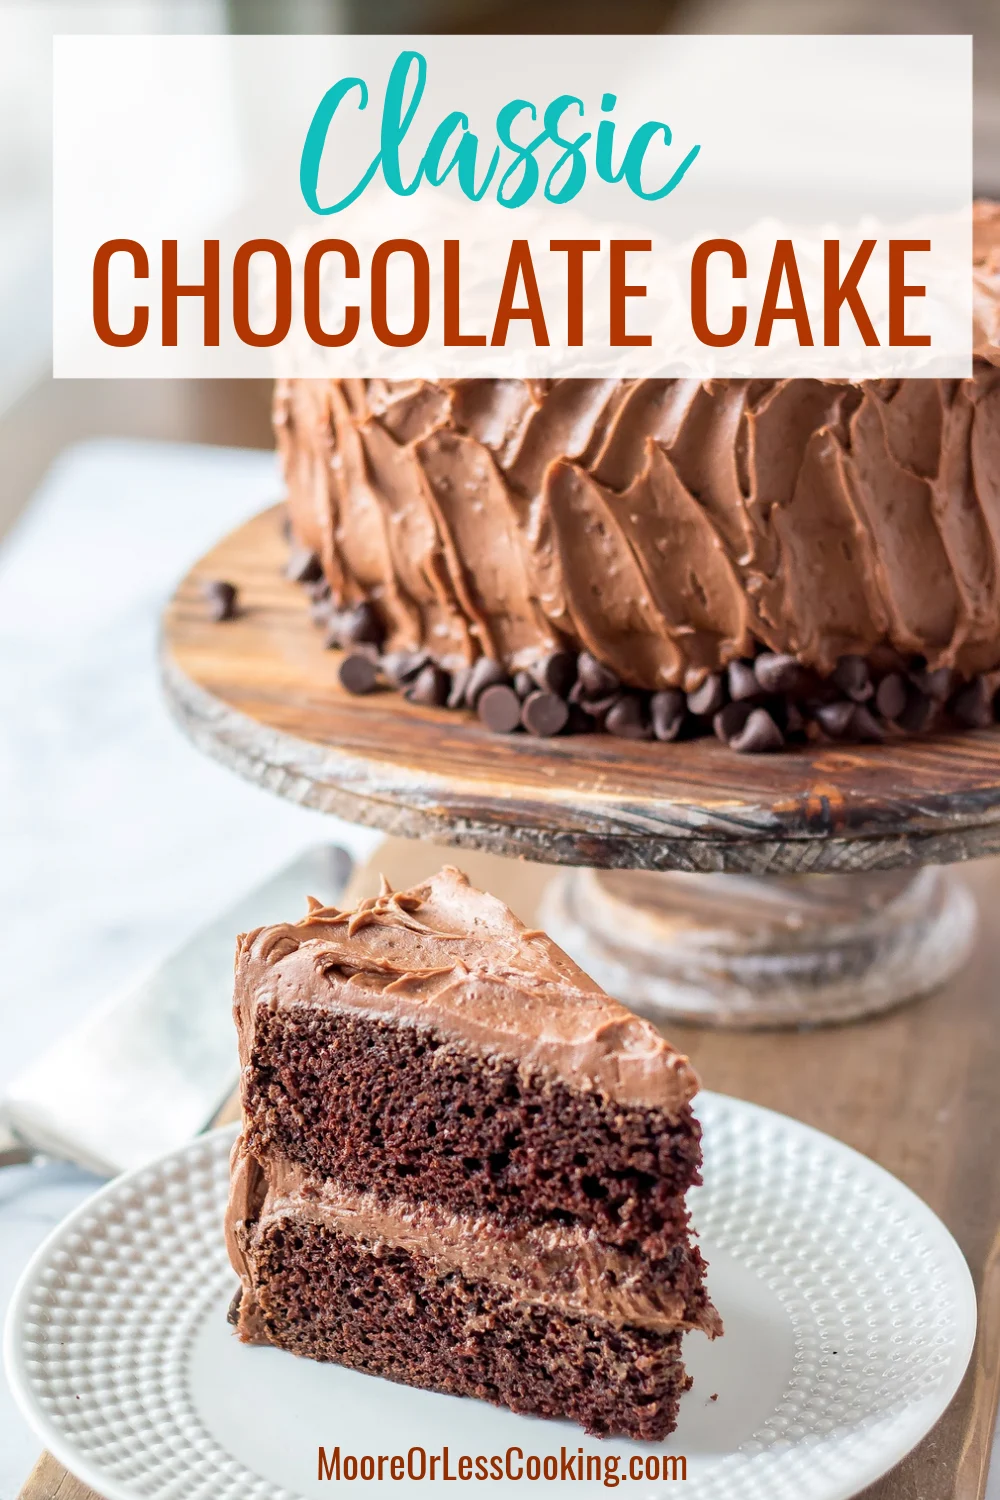 A milk-chocolate buttercream frosting adorns this classic chocolate layer cake that's rich and moist, making it the perfect dessert for any occasion. It's made from scratch and infused with chocolate goodness, inside and out. via @Mooreorlesscook